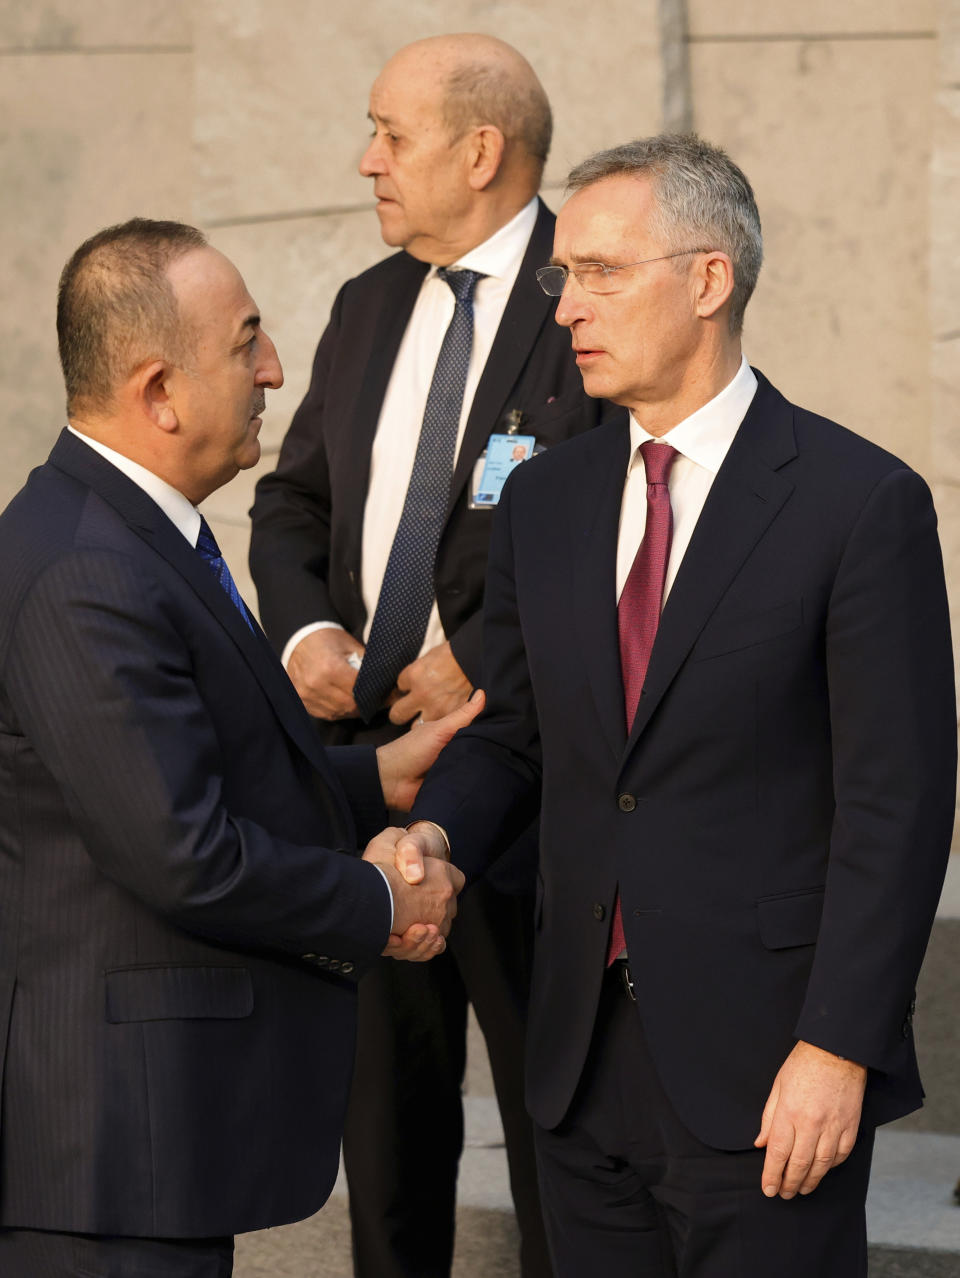 Turkish Foreign Minister Mevlut Cavusoglu, left, speaks with NATO Secretary General Jens Stoltenberg during a group photo at an extraordinary NATO foreign ministers meeting at NATO headquarters in Brussels, Friday, March 4, 2022. U.S. Secretary of State Antony Blinken meets Friday with his counterparts from NATO and the European Union, as Russia's war on Ukraine entered its ninth day marked by the seizure of the strategic port city of Kherson and the shelling of Europe's largest nuclear power plant. (AP Photo/Olivier Matthys)